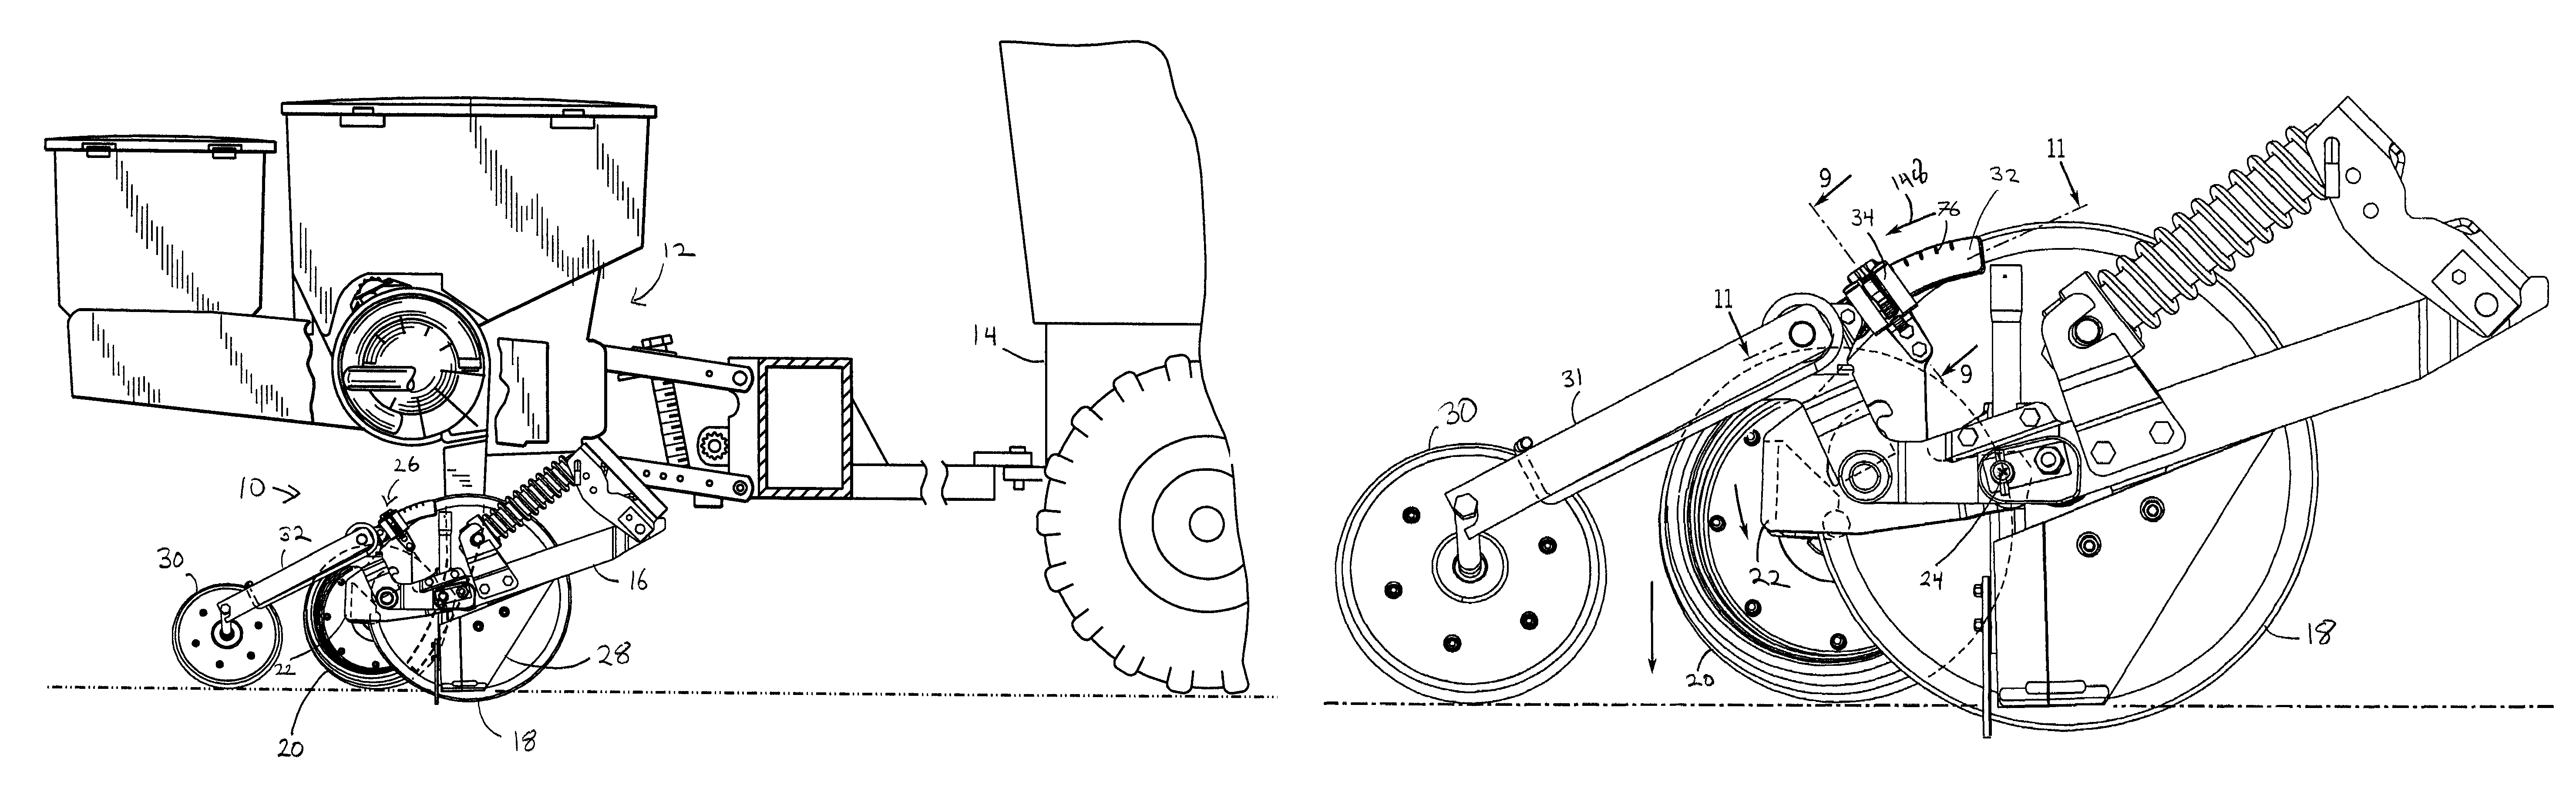 System and method for a disc opener with gauge wheel depth adjustment assembly